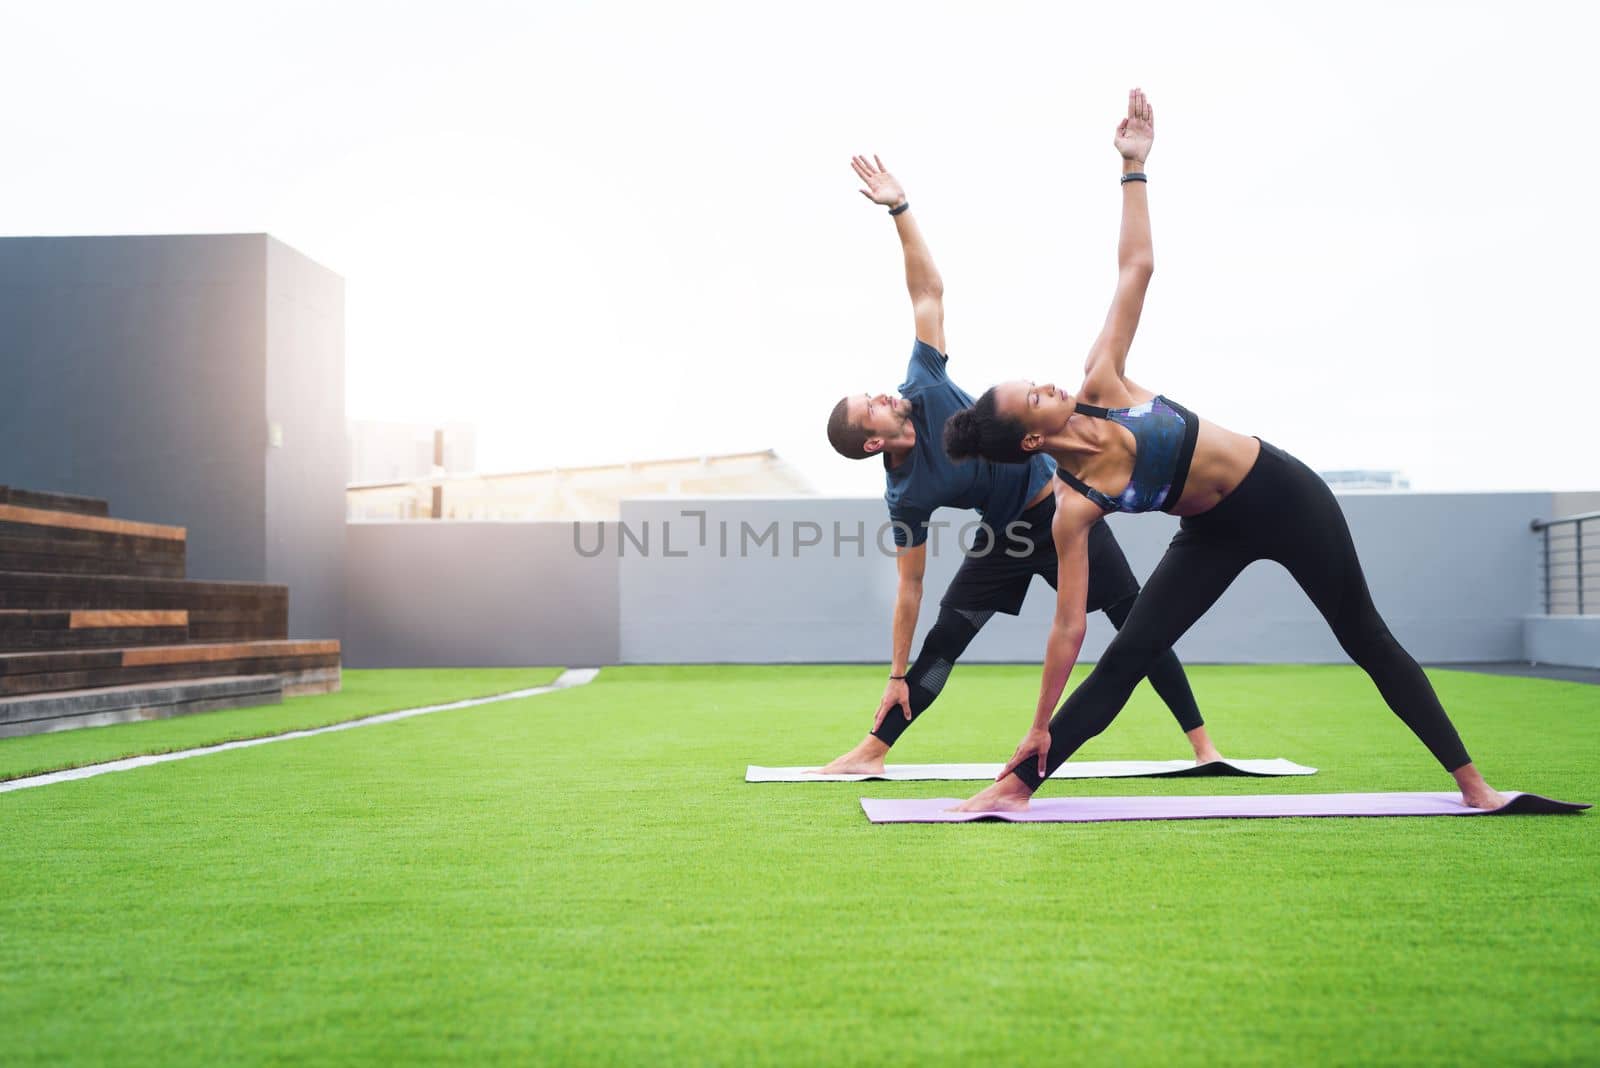 Yoga helps in retaining the vitality in your body and mind. a young man and woman practising yoga together outdoors